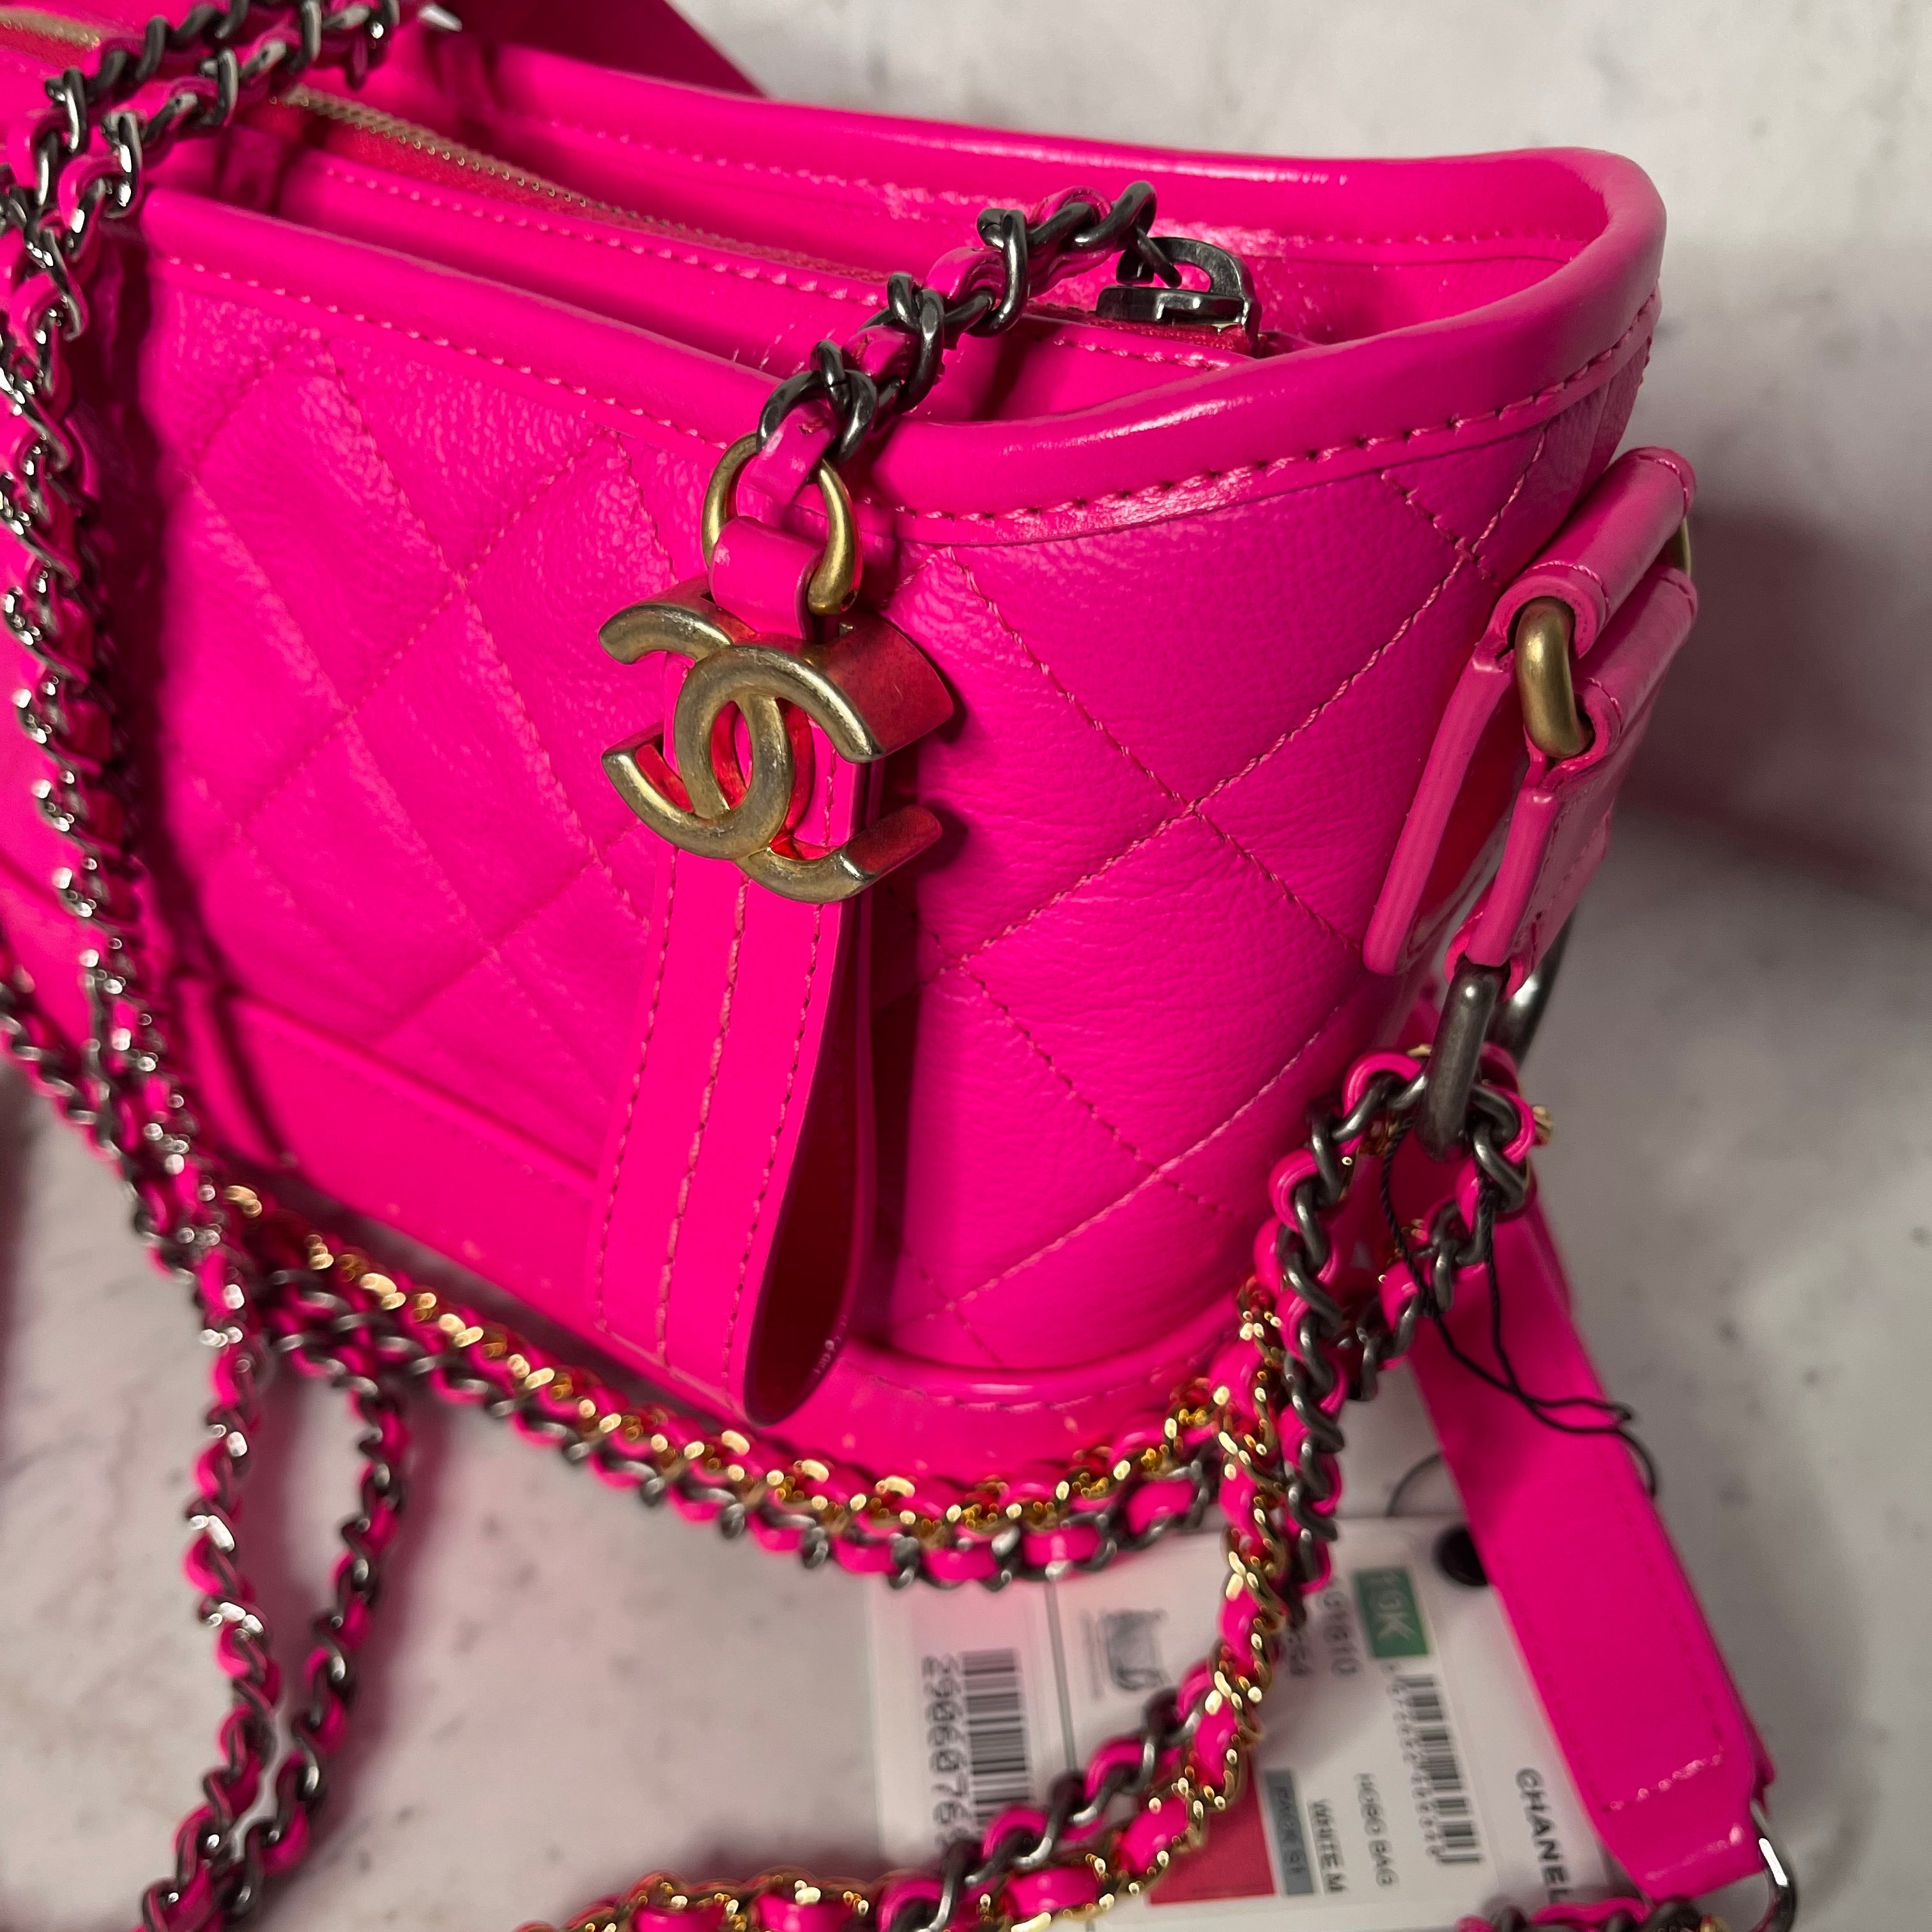 This Could Be Chanel's Prettiest Pink Tote Yet This Season - BAGAHOLICBOY